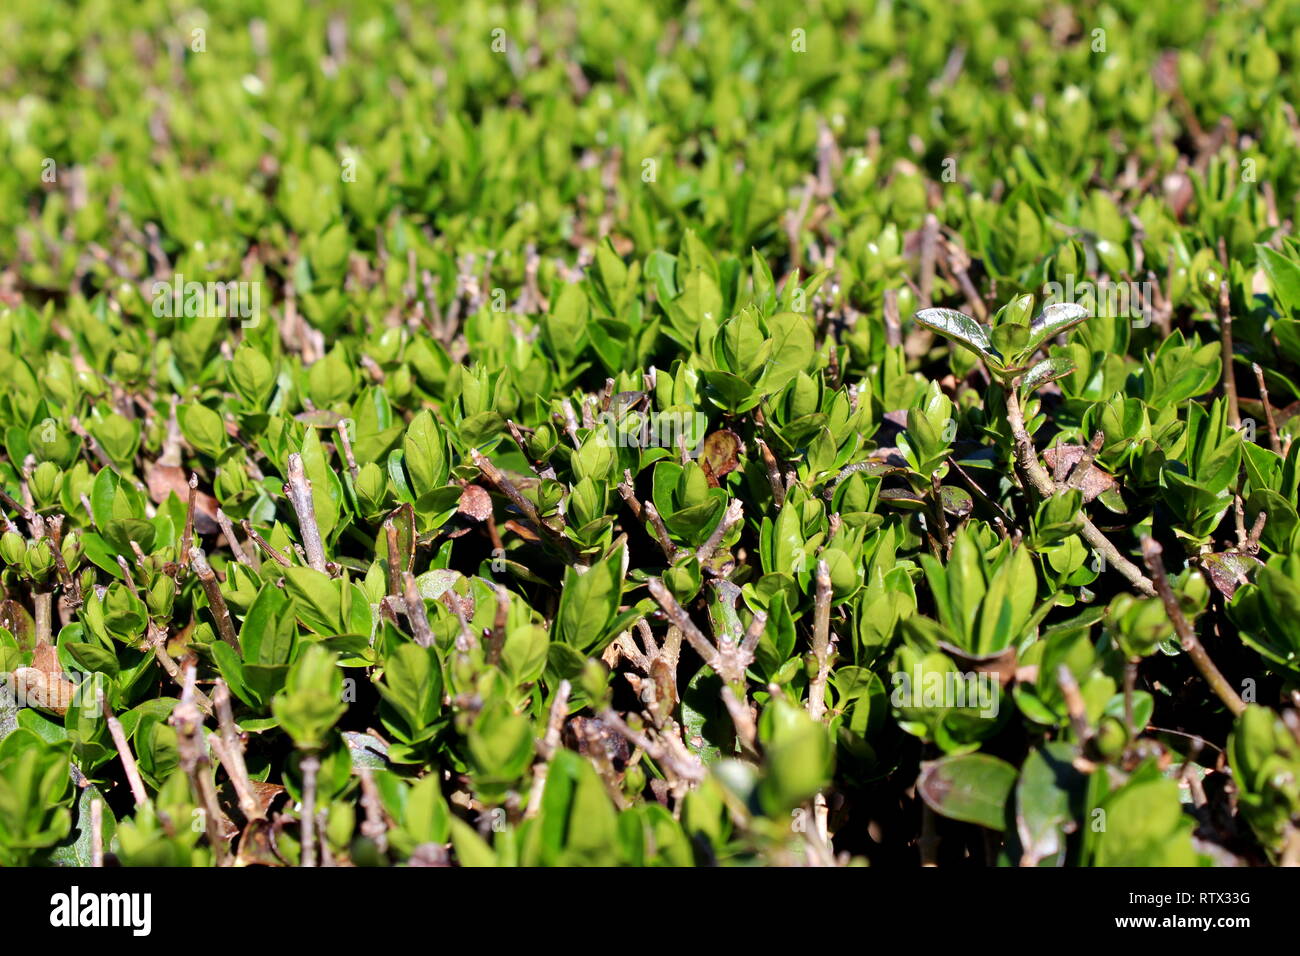 Hedge or Hedgerow closely spaced densely planted shrubs with multiple small branches and light green leaves in local garden on warm sunny day Stock Photo